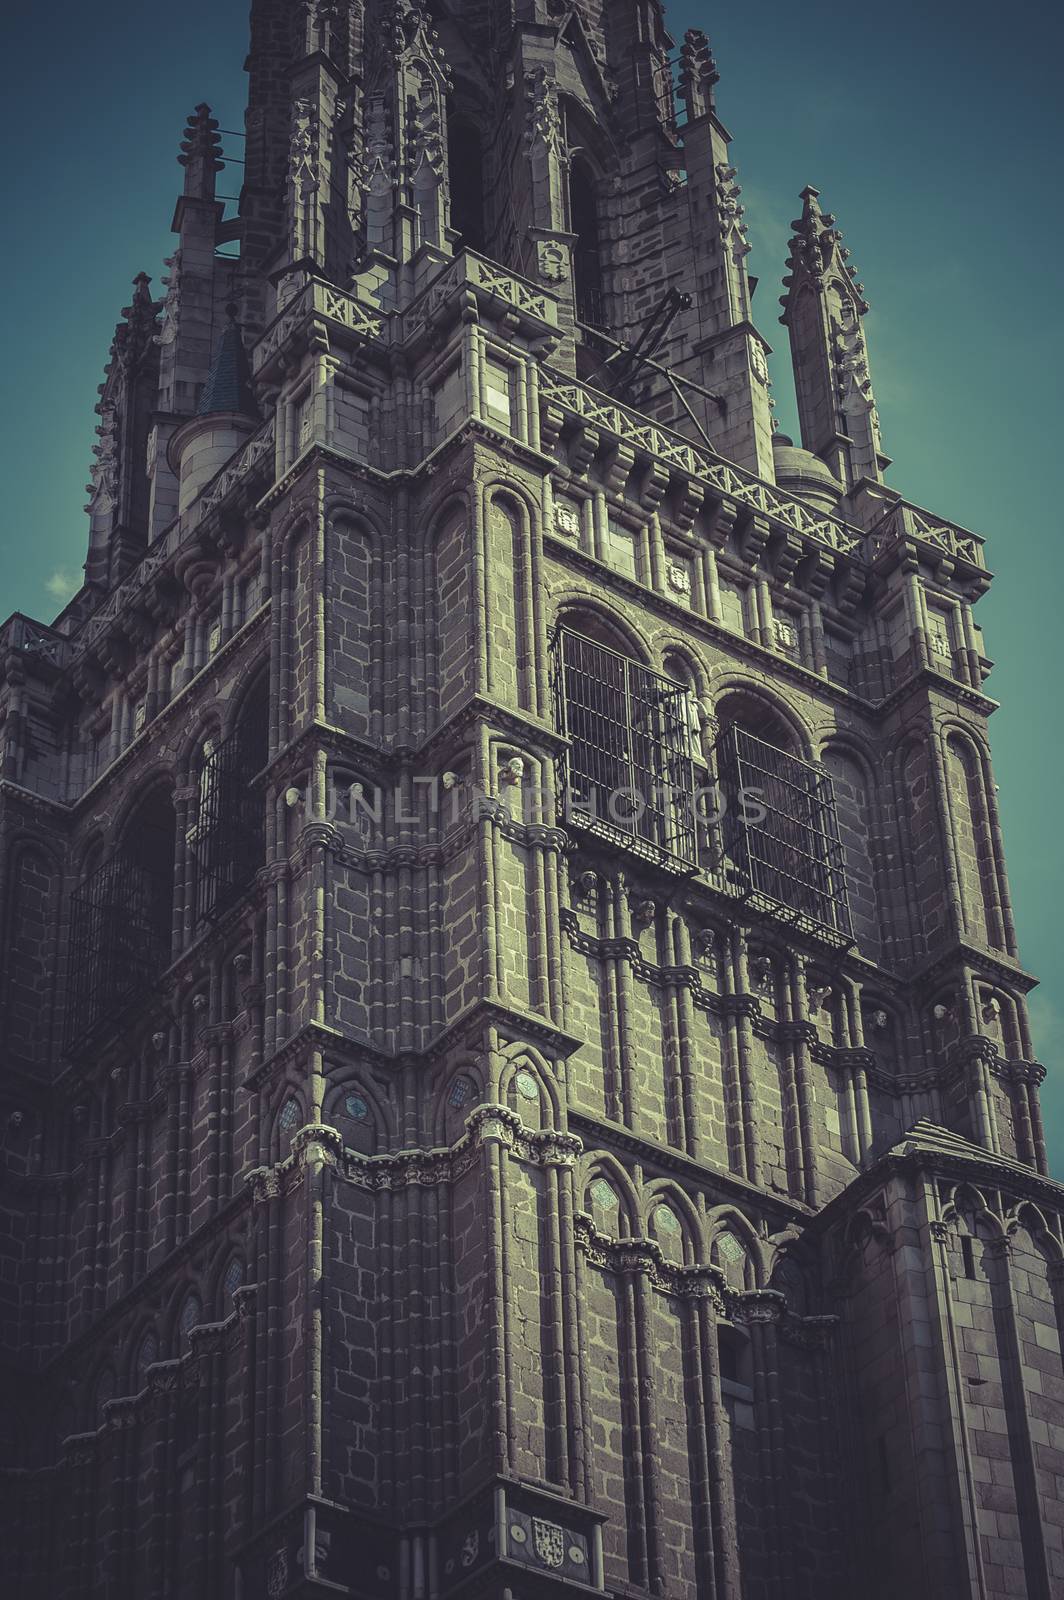 Gothic, Toledo cathedral, majestic monument in spain. by FernandoCortes